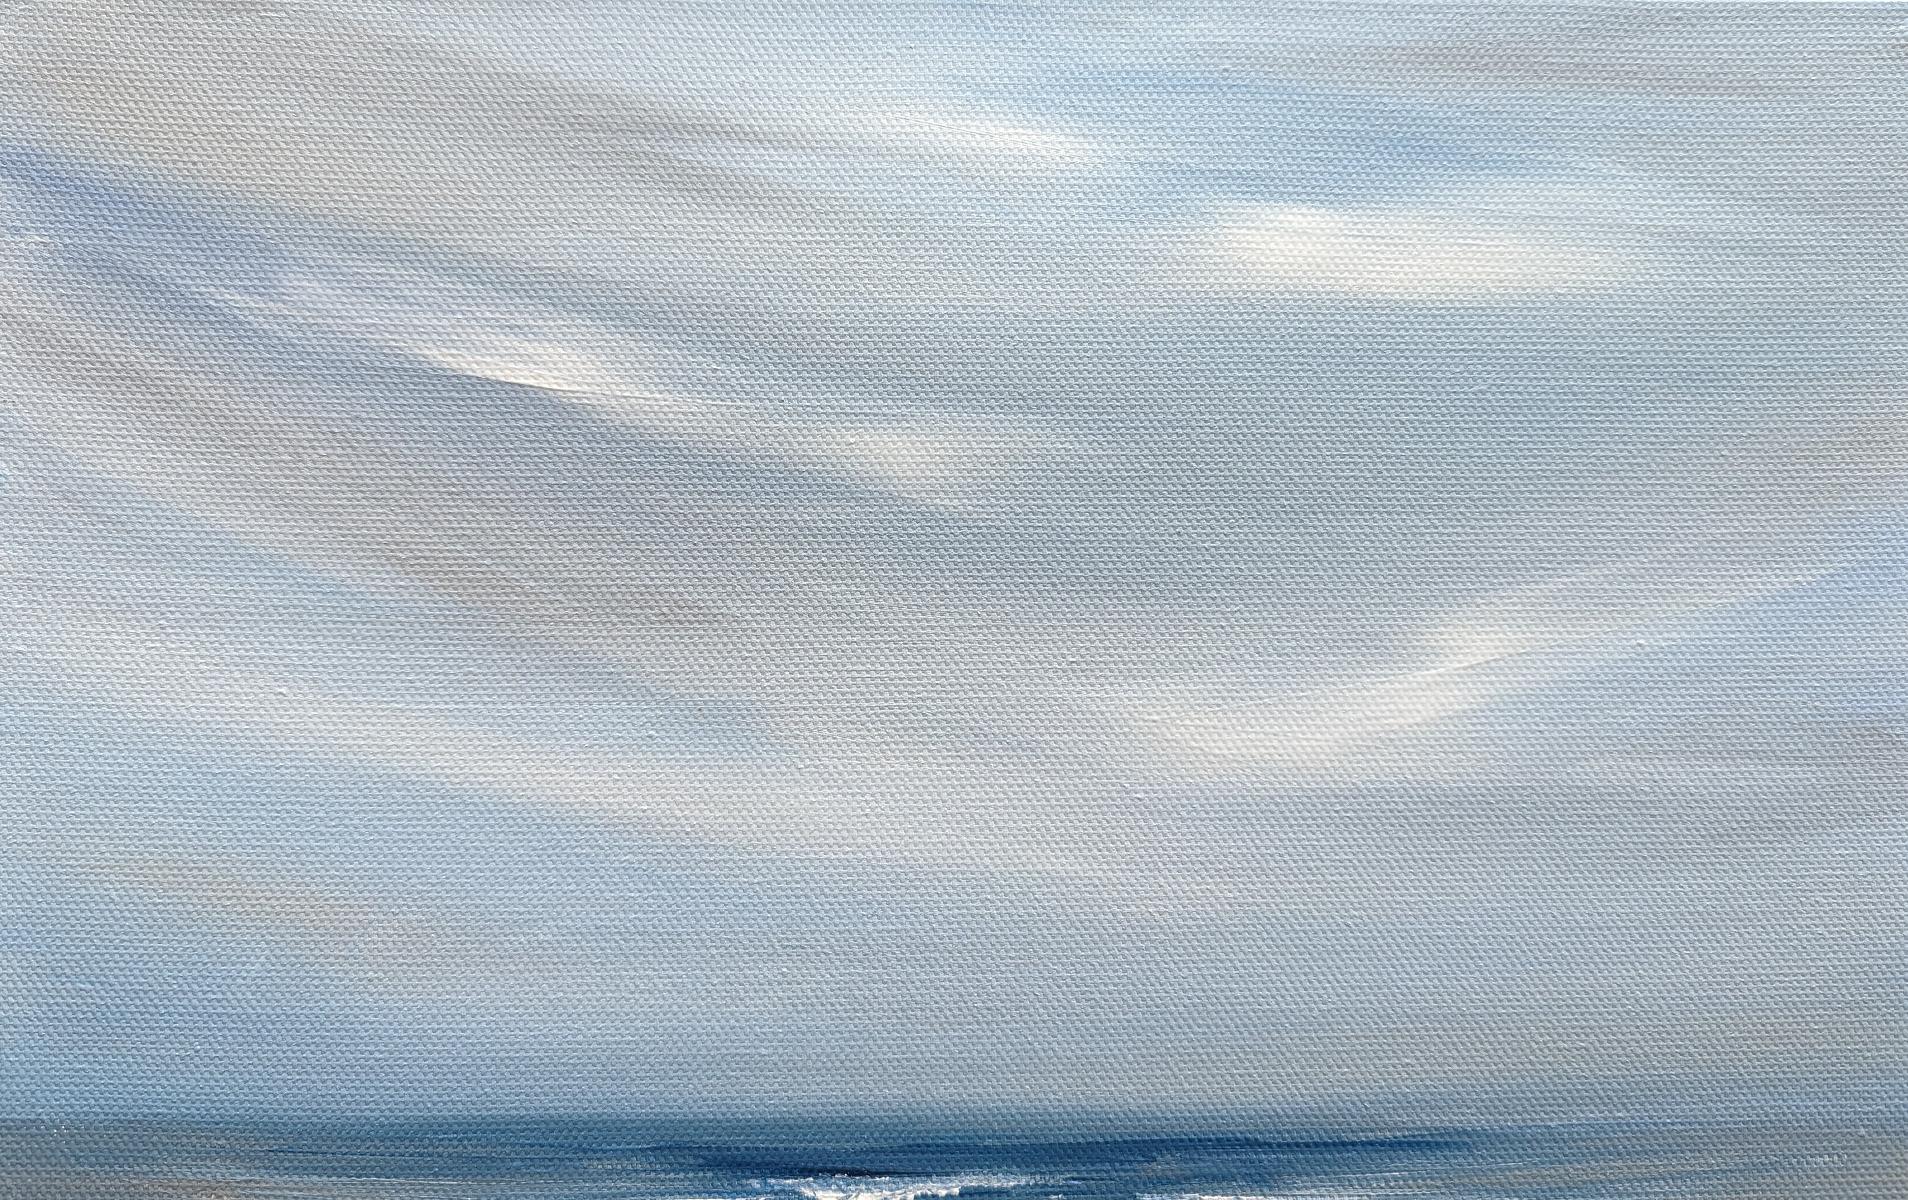 The Calm Before The Storm #3, Original painting, Seascape, landscape, Beach - Painting by Lucy Moore